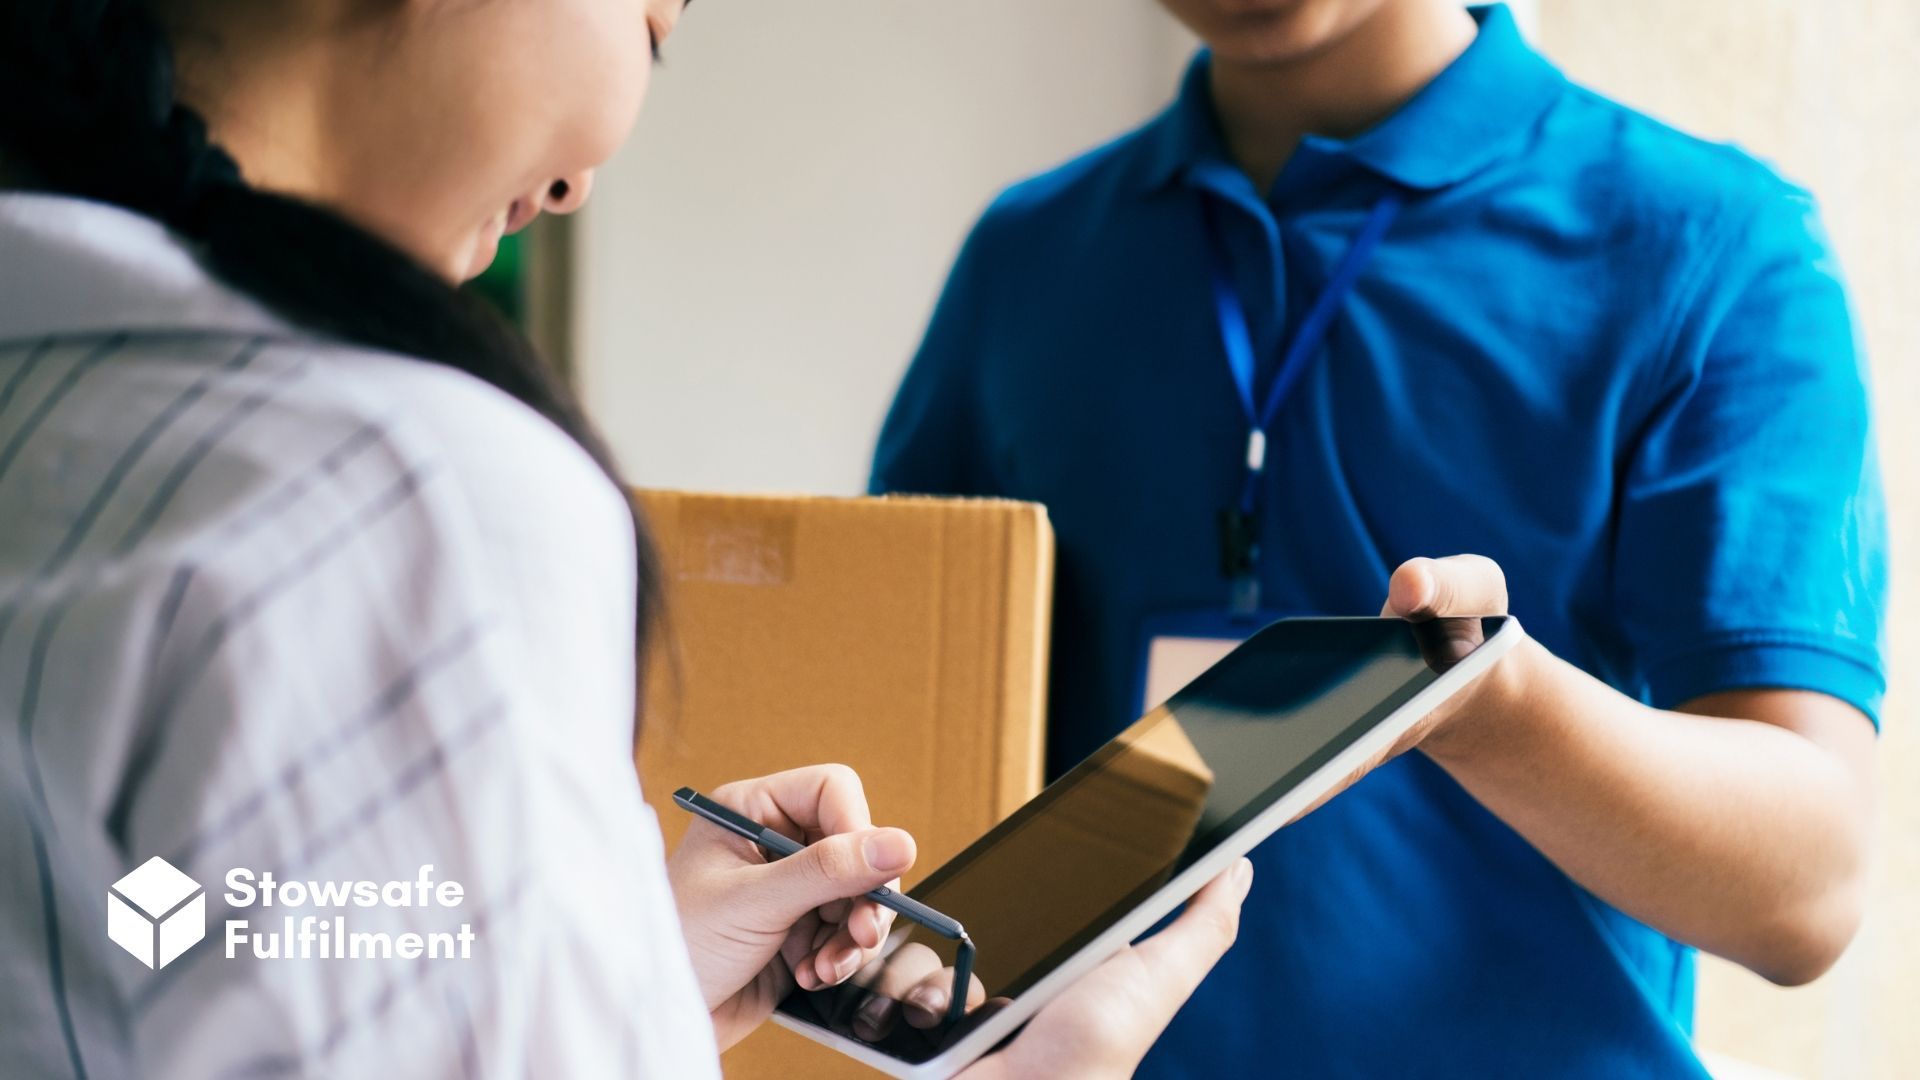 In the Age of Amazon, people expect fast, reliable delivery. Read our guide to learn how SMEs can meet customer expectations in this area.